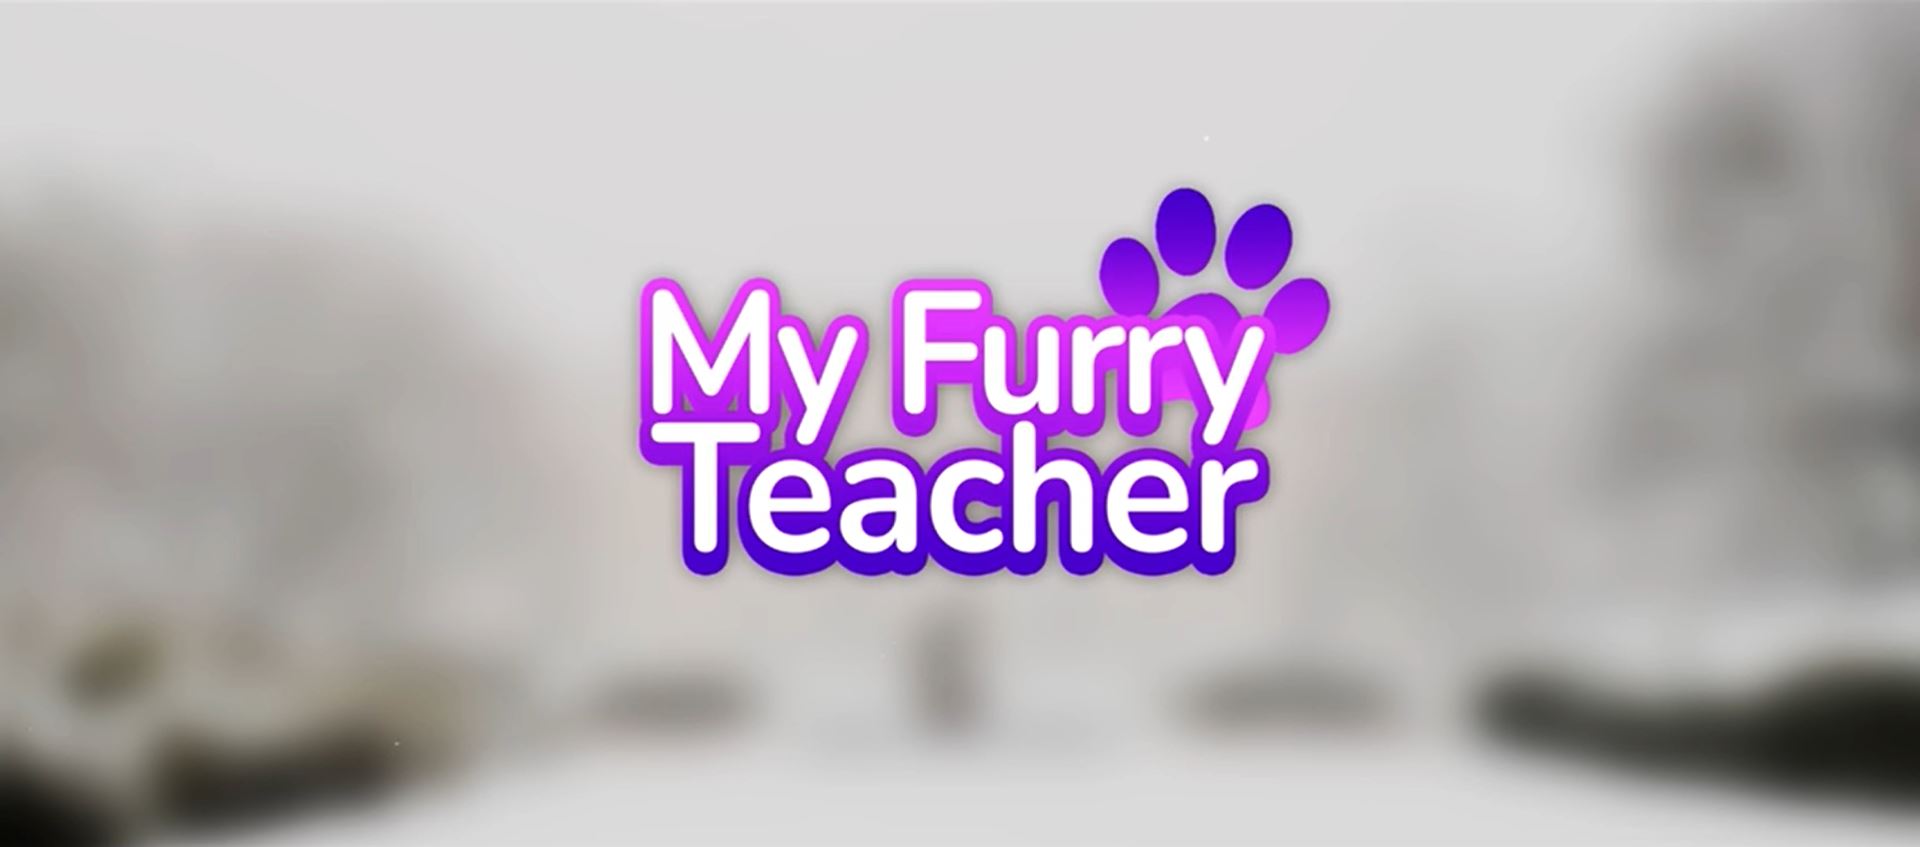 My Furry Teacher [Finished] - Version: Final